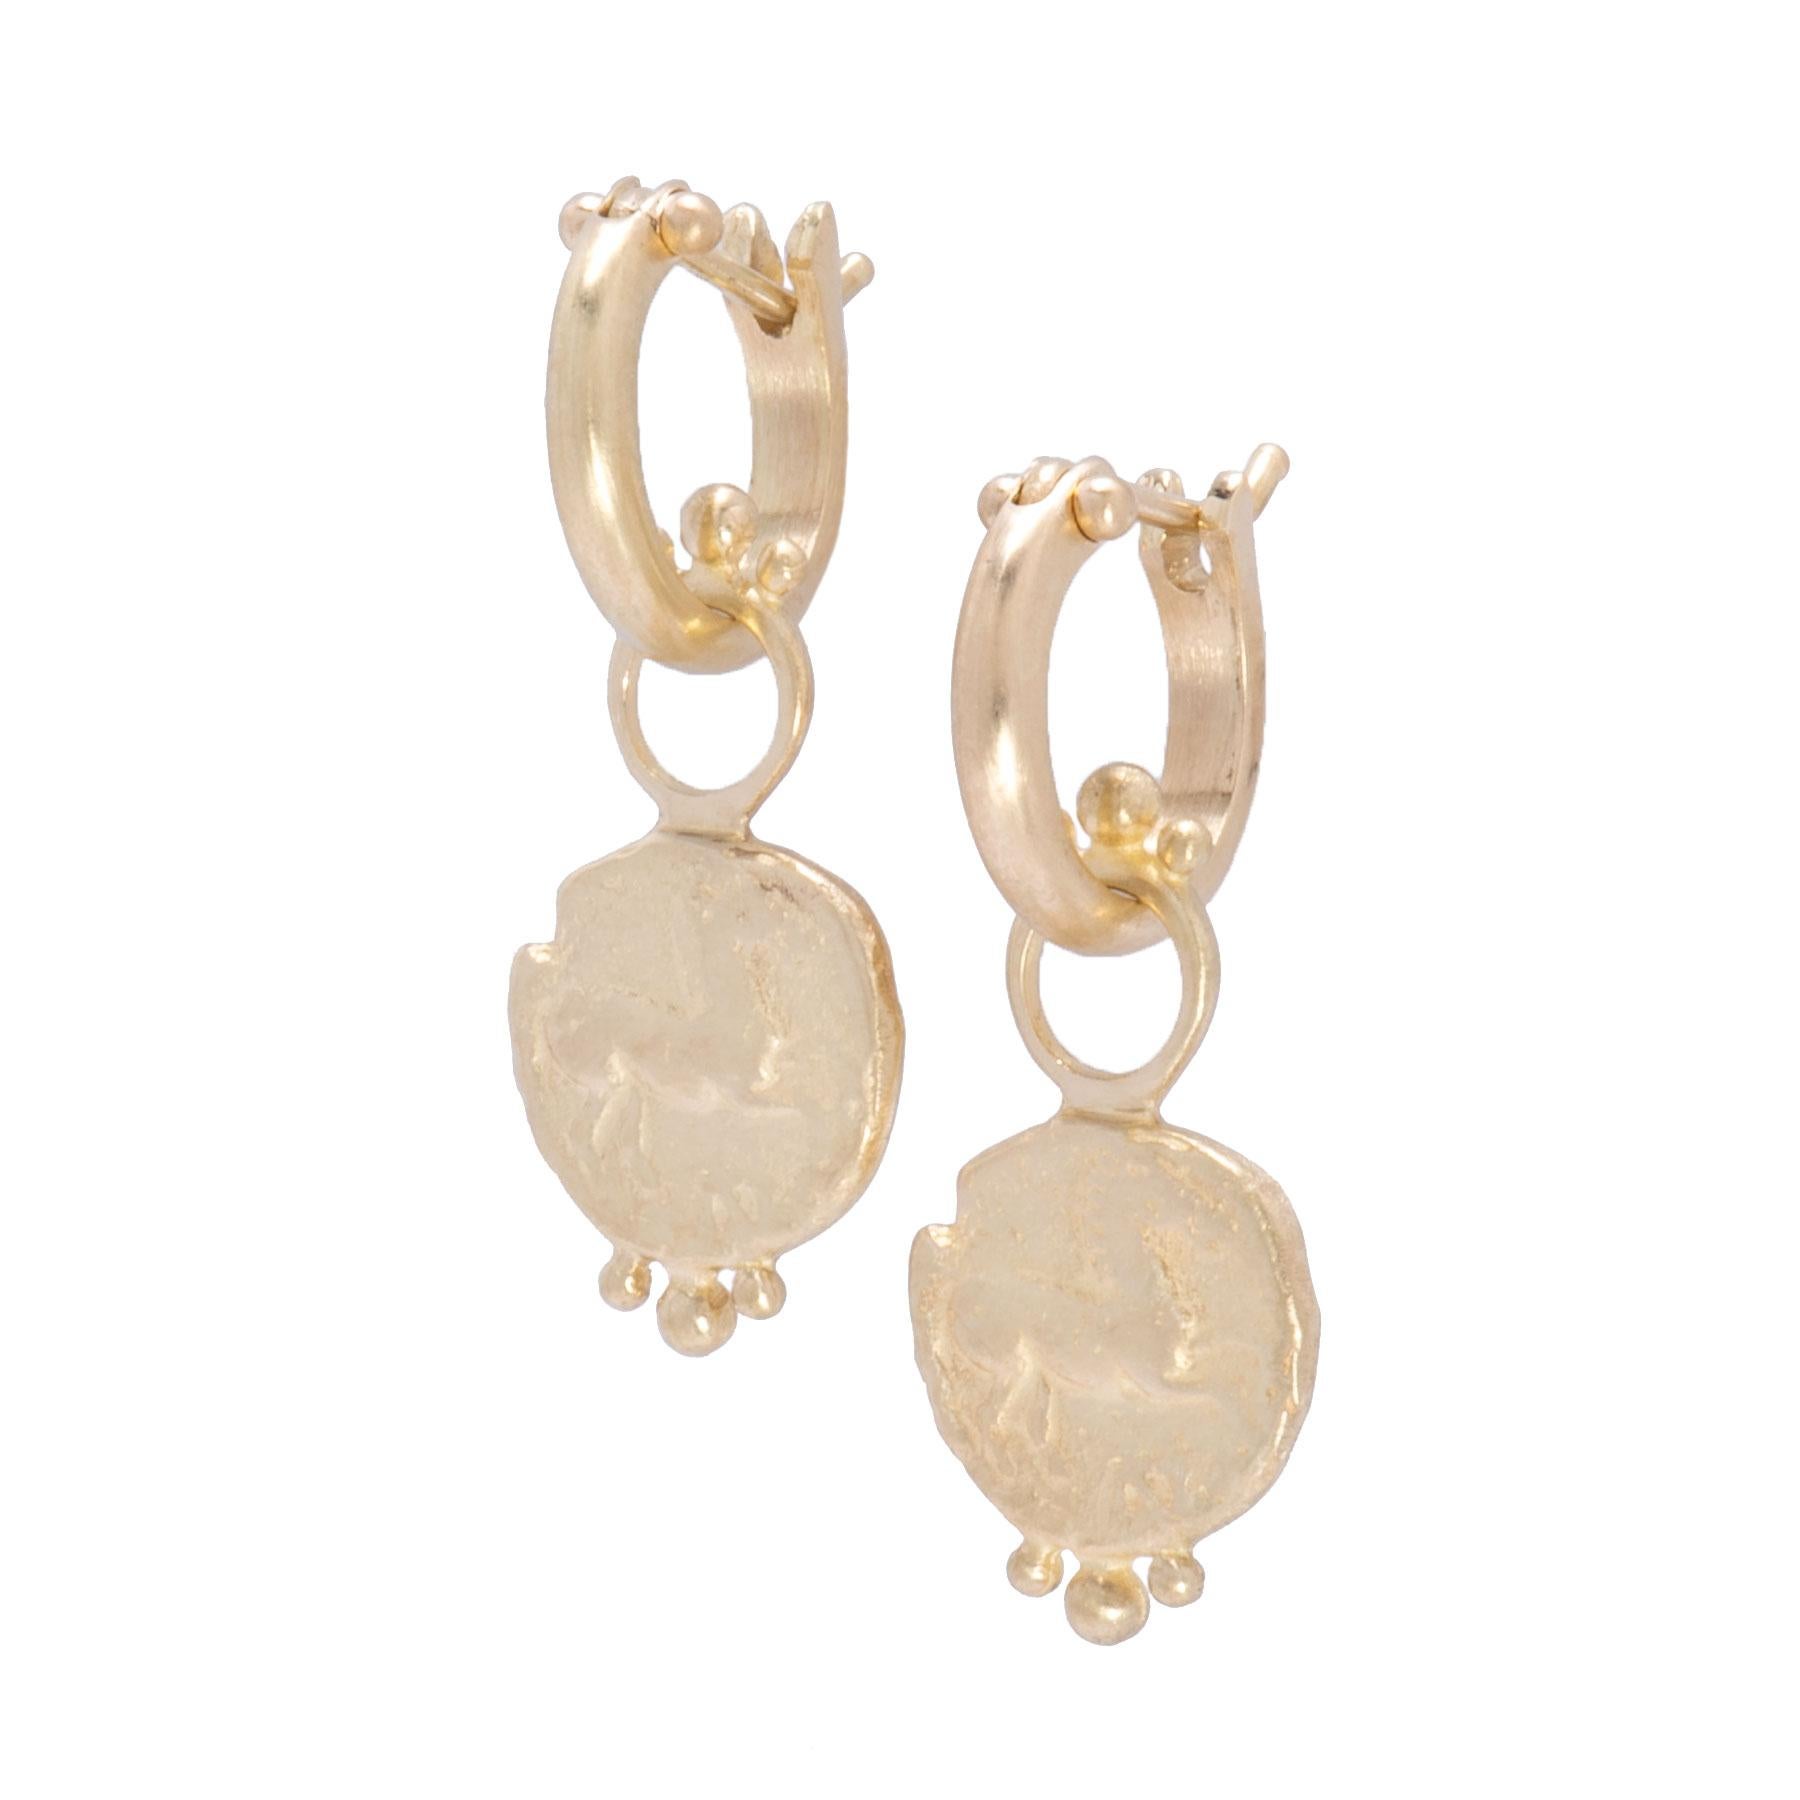 Prancing Horse Drops crafted in 18k gold with a satiny finish are cast replicas of the Greek Thrace Maroneian horse coin. The sculptural bas-relief of a cantering horse is set on a textured background on the face of these earrings. A crown of gold